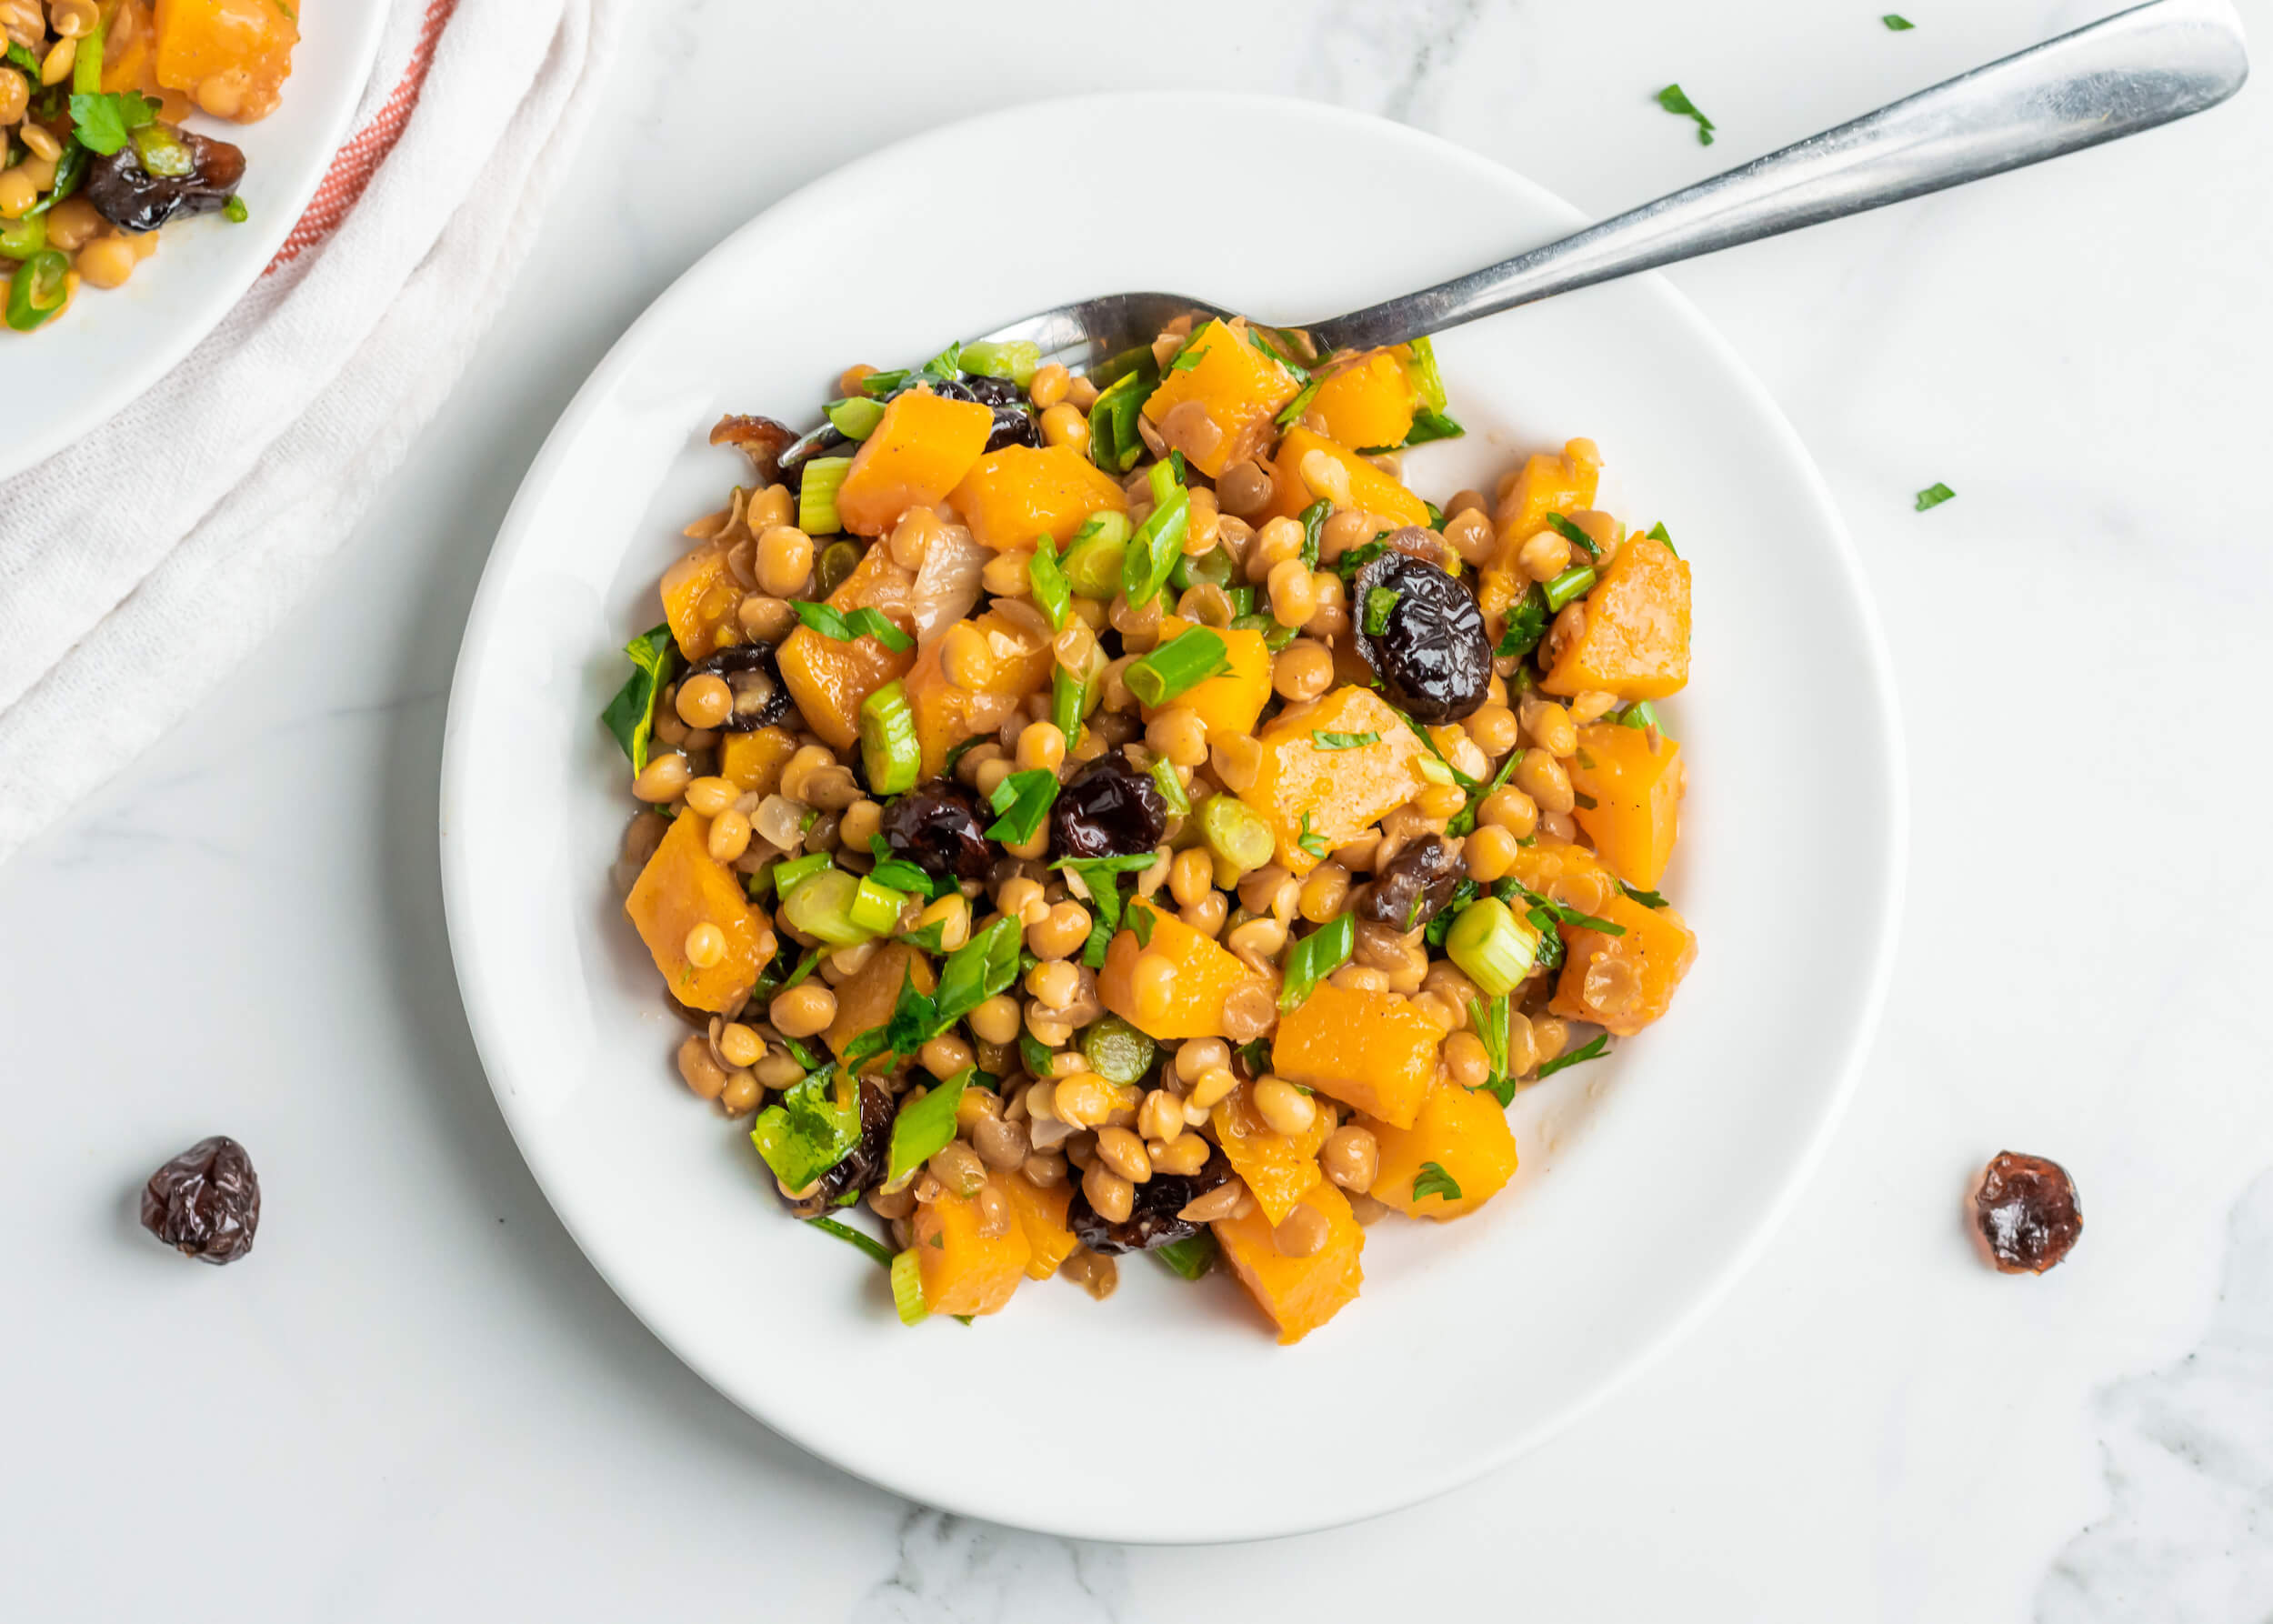 20 Healthy Meals to Help Your Clients Eat Healthy on a Tight Budget: Lentil Salad with Maple Roasted Squash